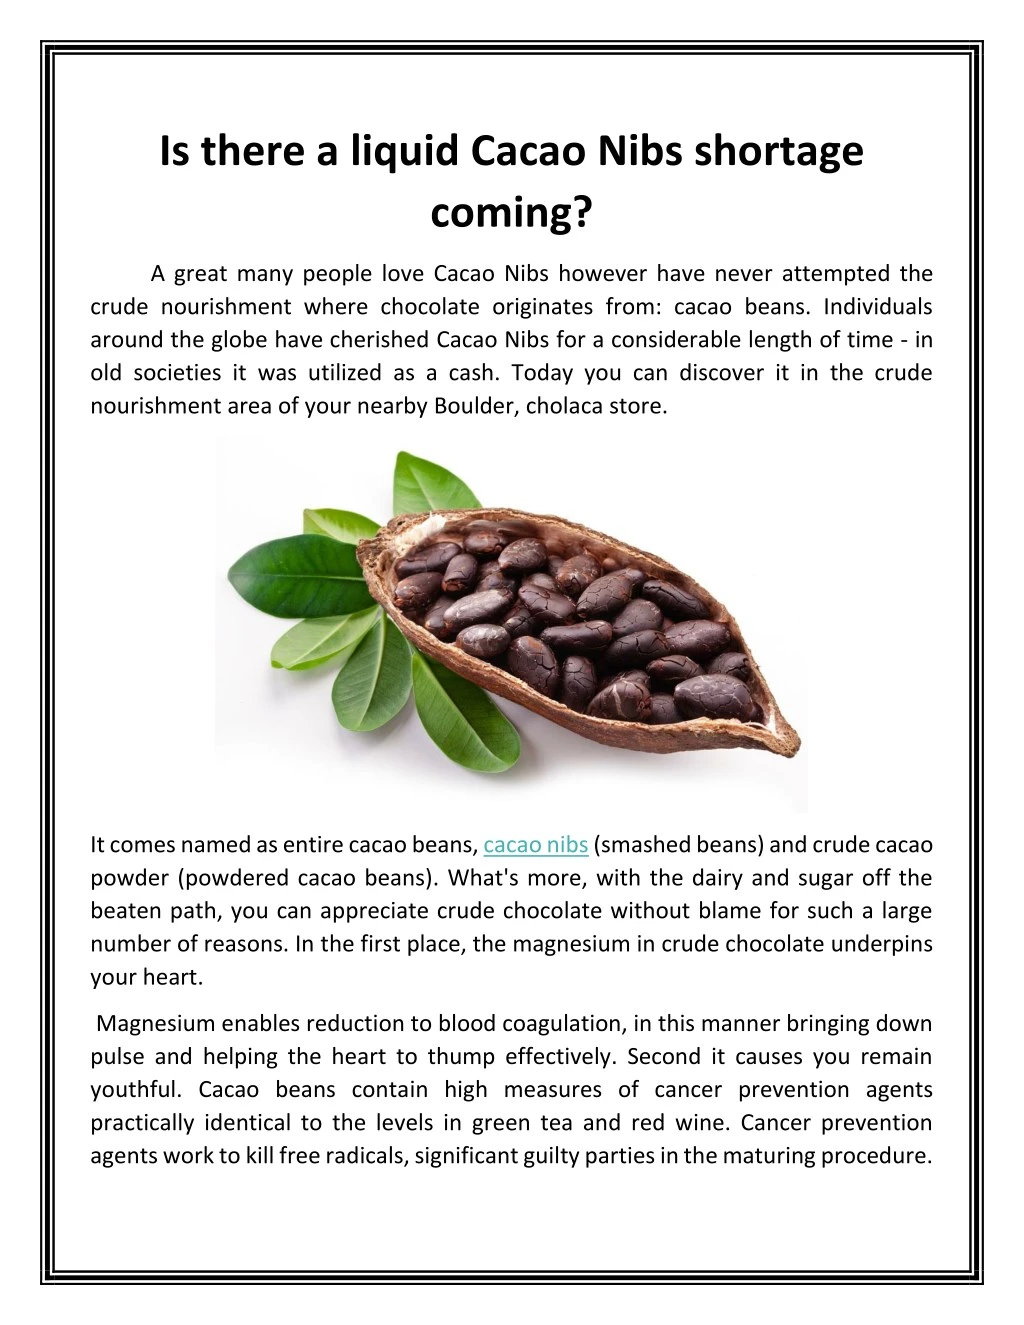 is there a liquid cacao nibs shortage coming